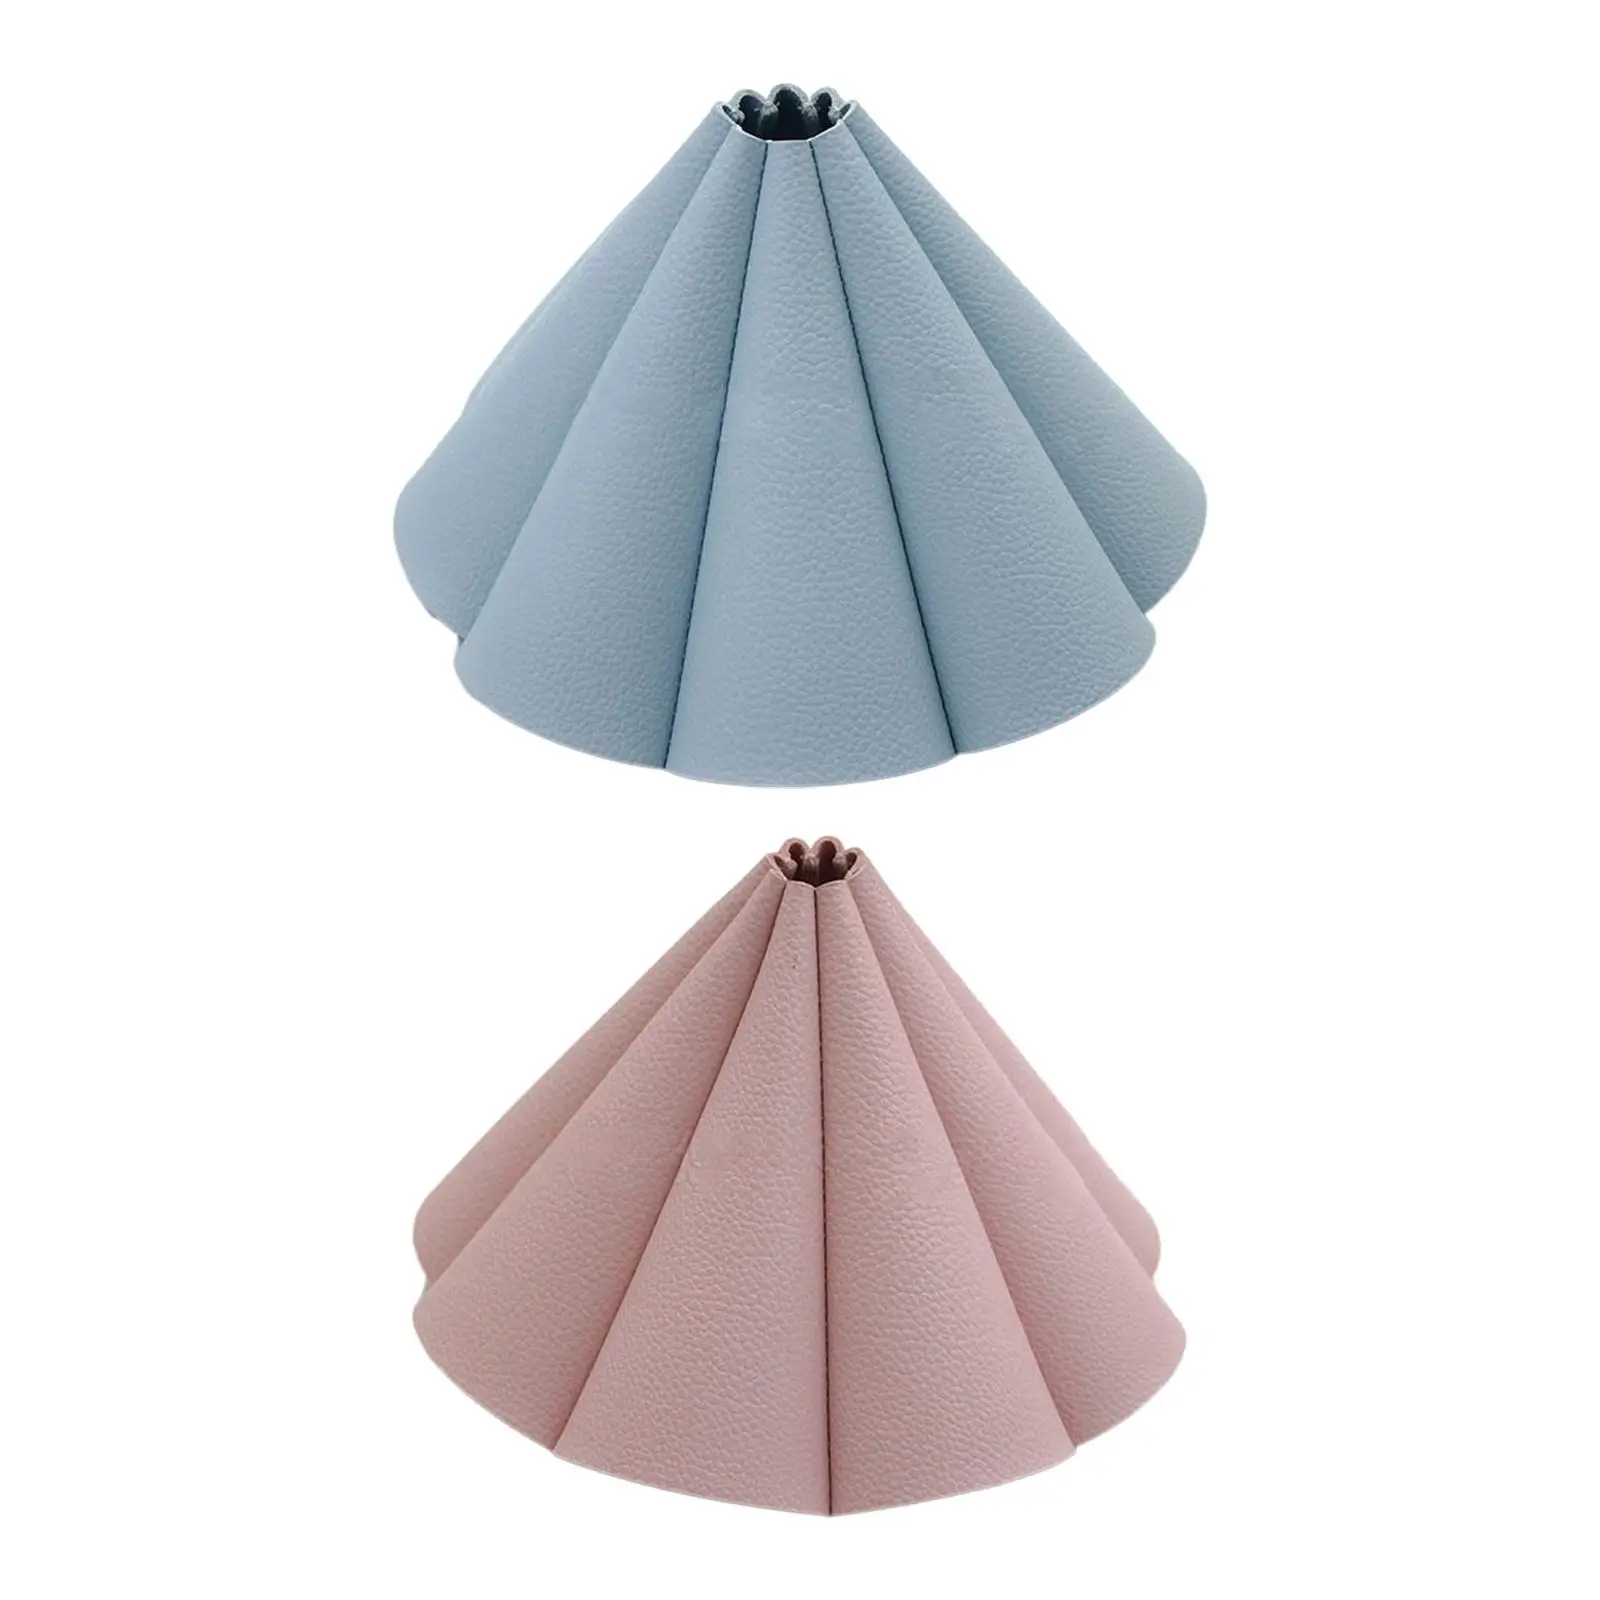 Leather Waterproof Dust Proof Light Cover Removable Lamp Shade for Home